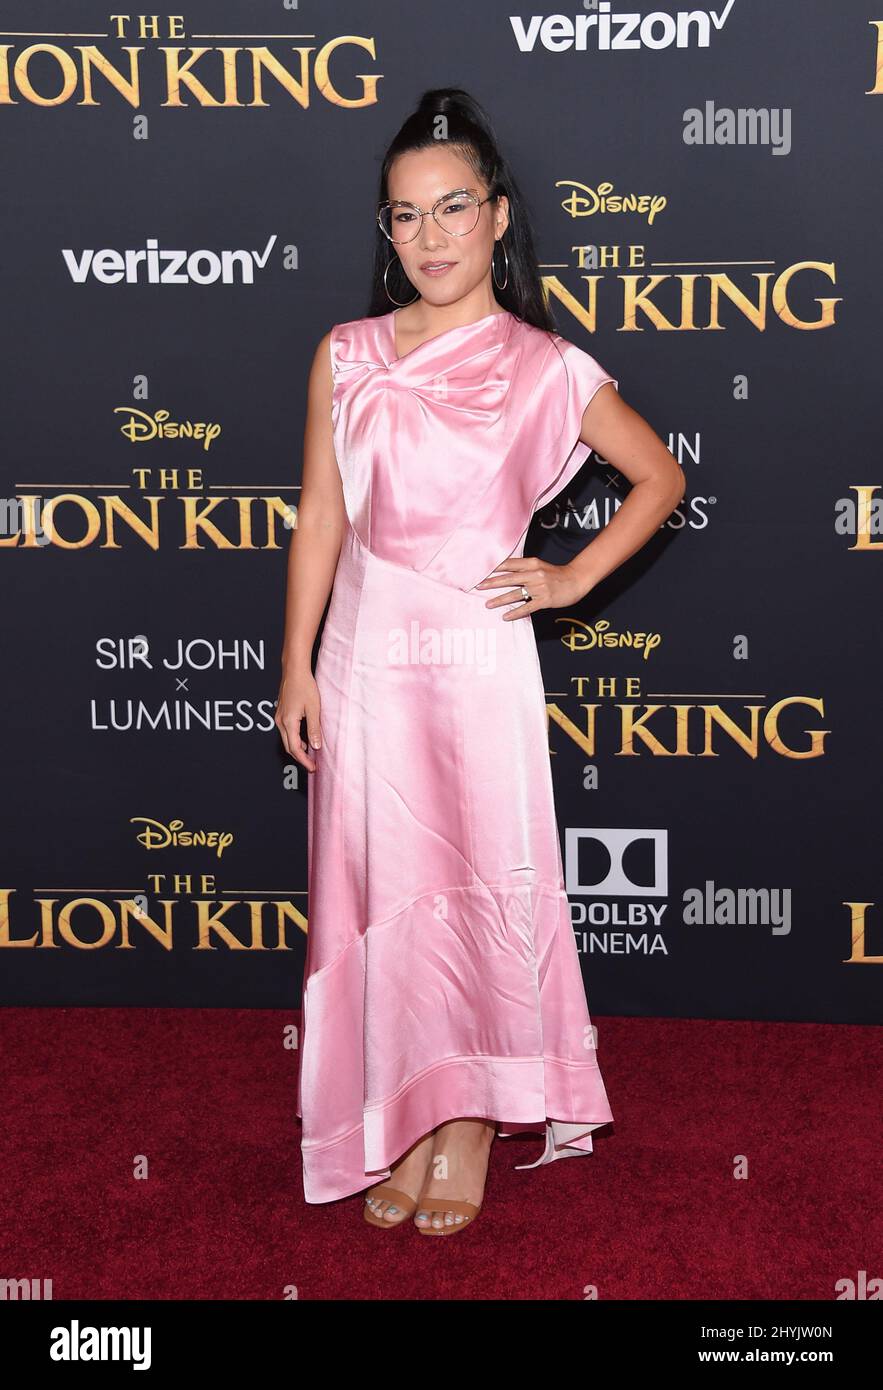 Ali Wong at 'The Lion King' world premiere held at the Dolby Theatre on July 9, 2019 in Hollywood, CA. Stock Photo